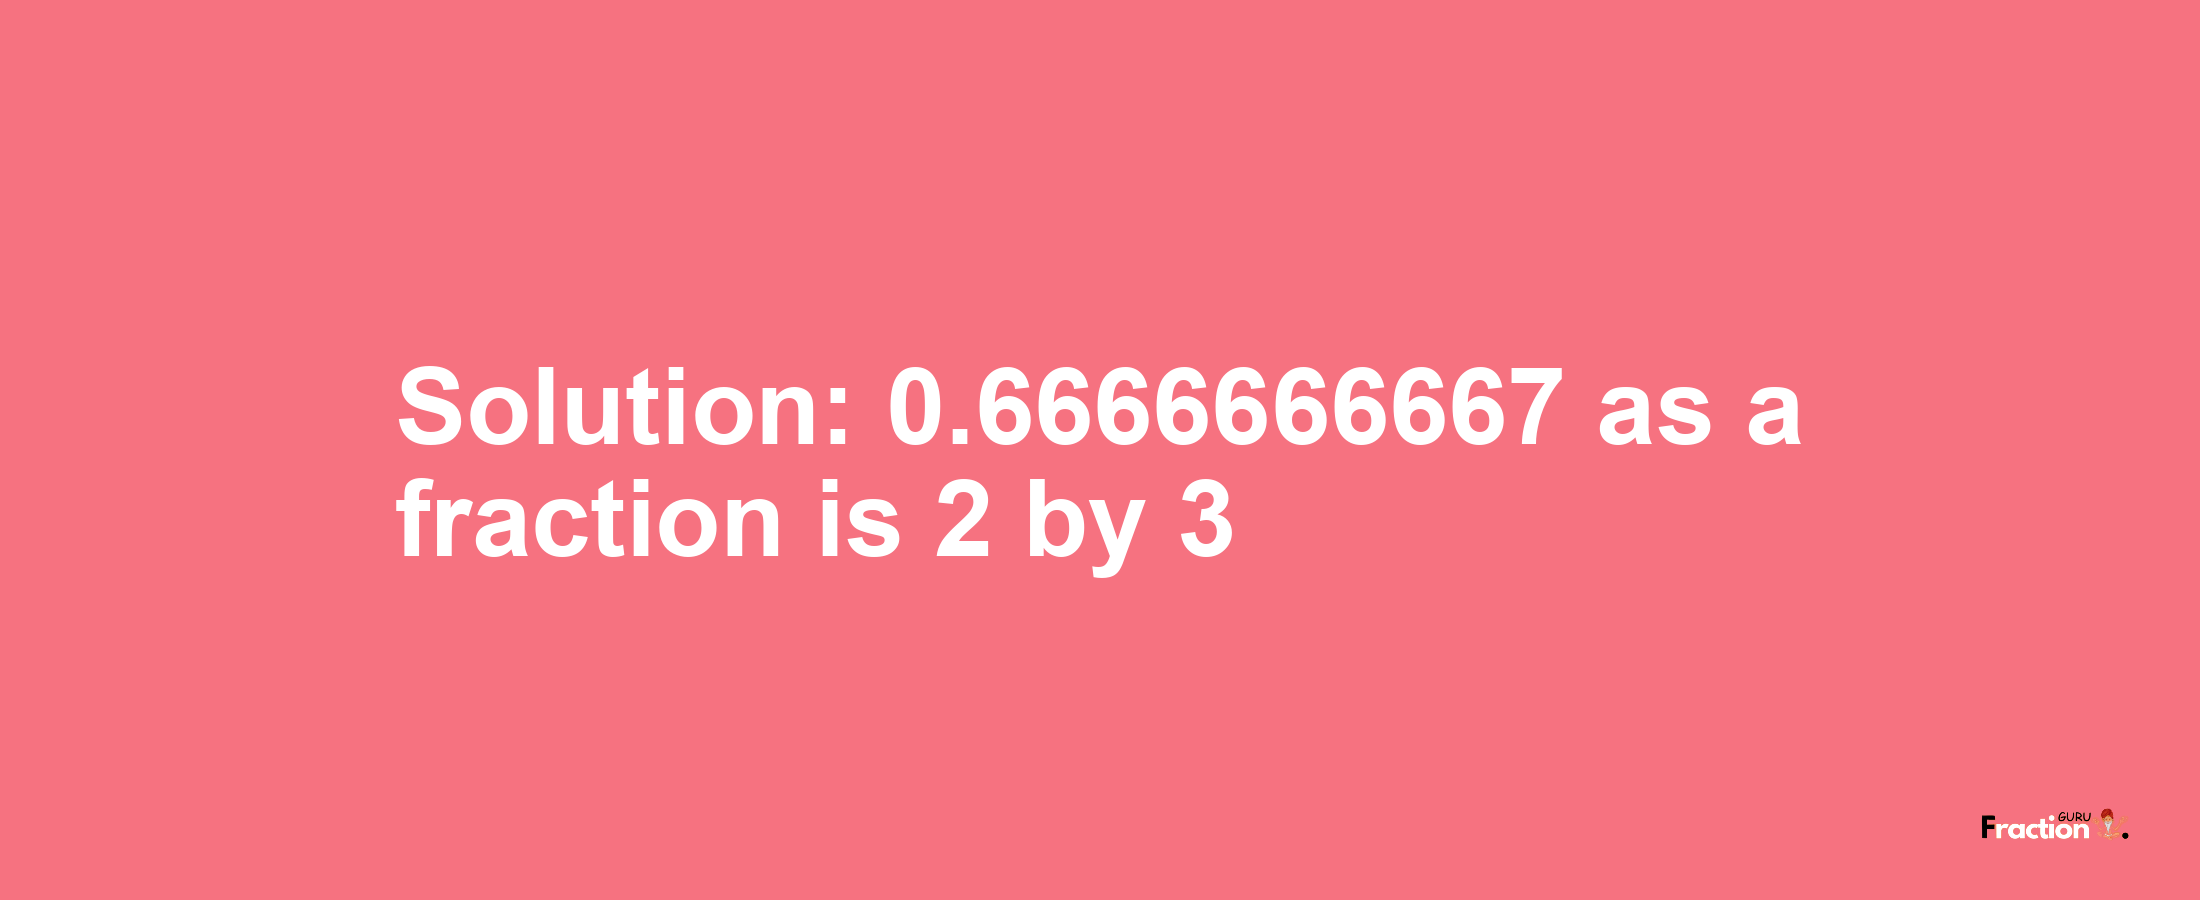 Solution:0.6666666667 as a fraction is 2/3